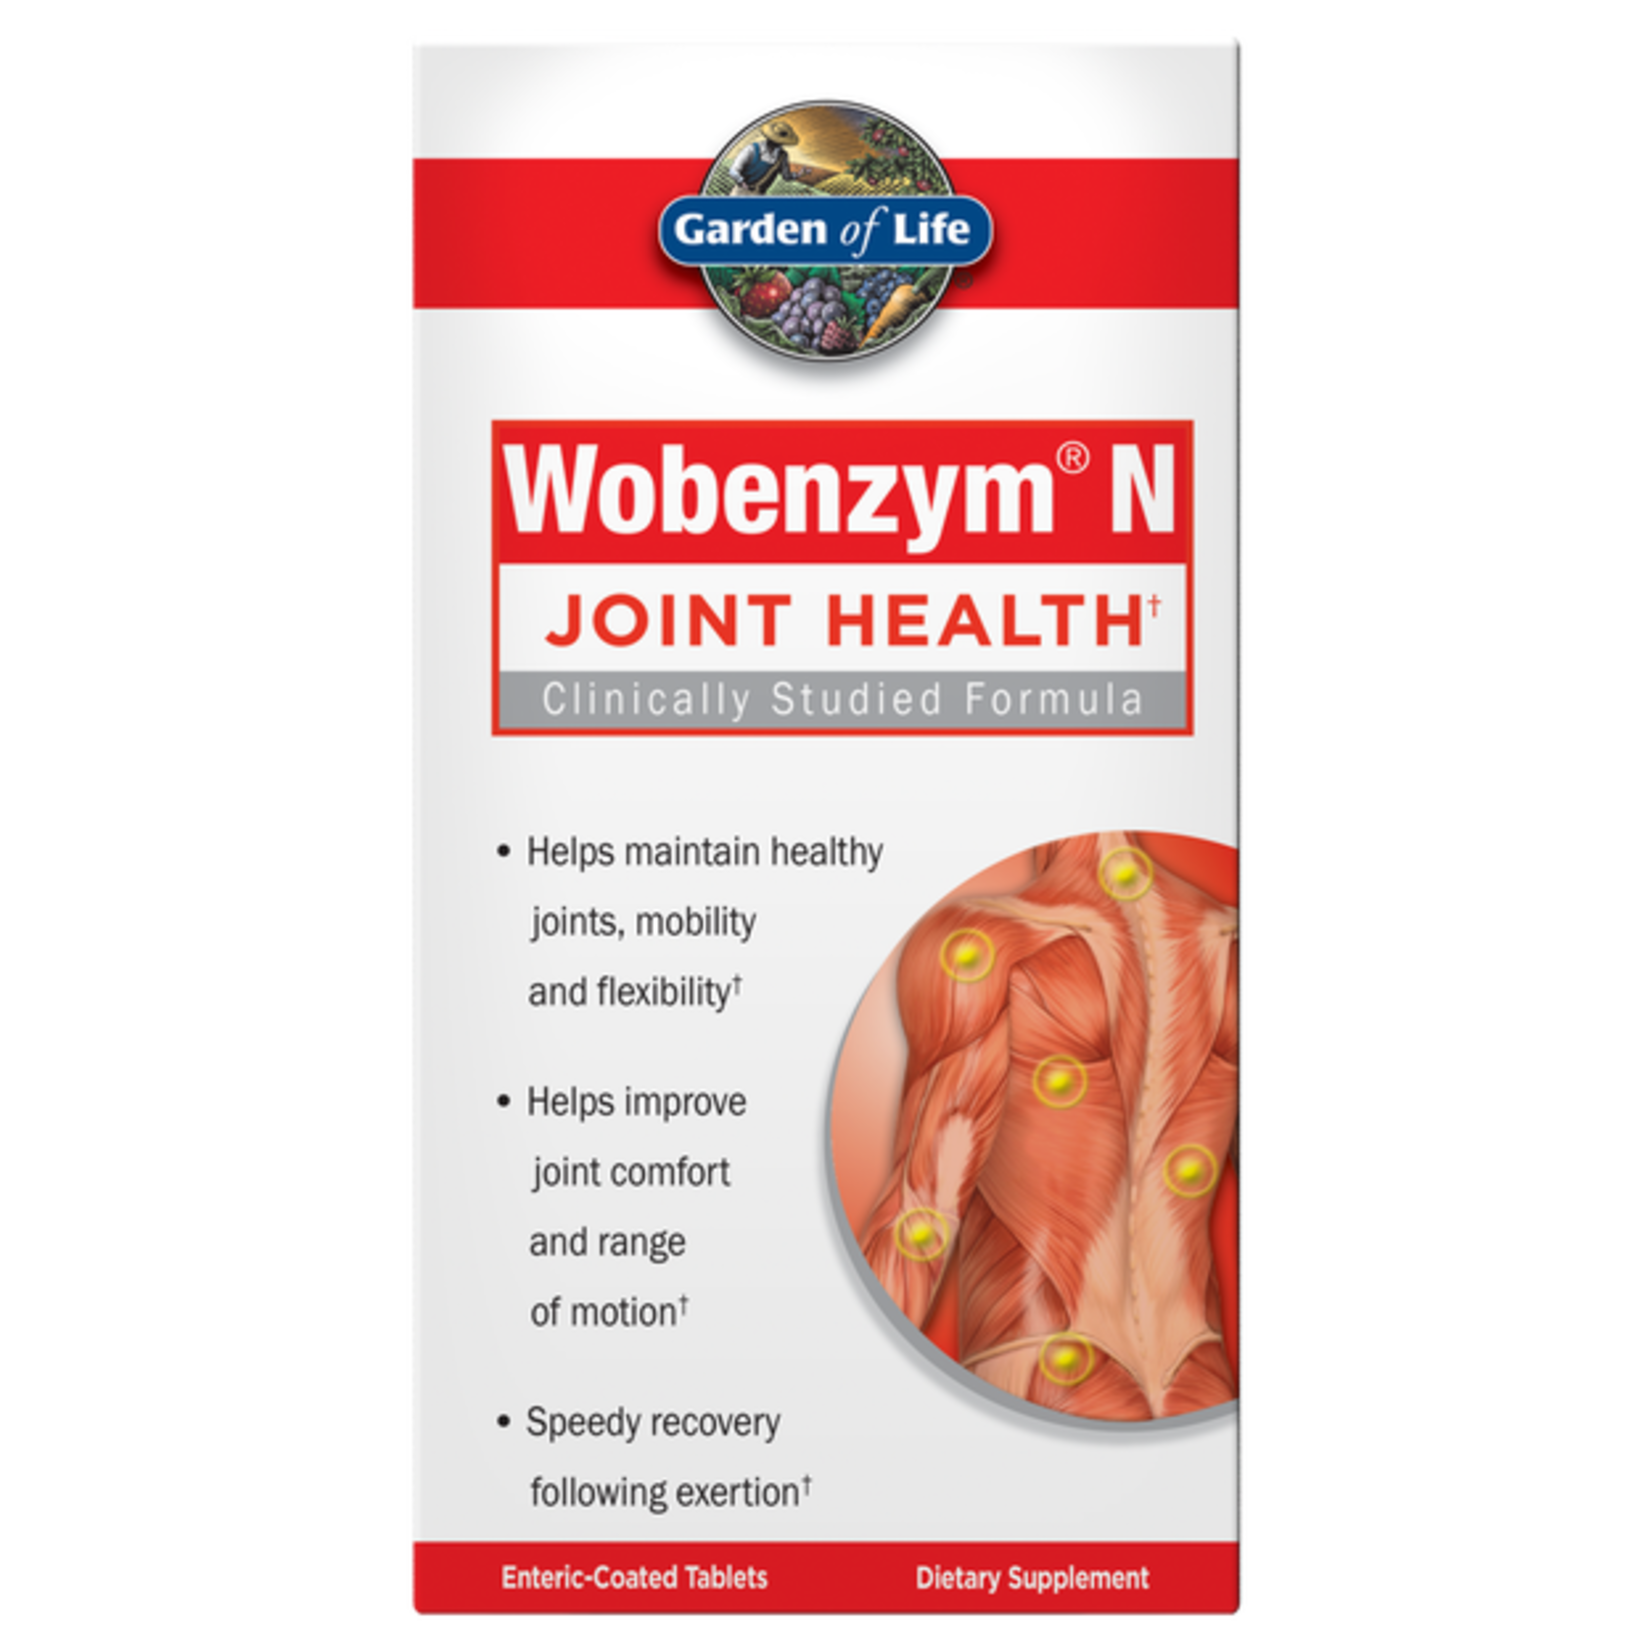 Garden of Life Garden of Life - Wobenzym N Joint Health - 200 Tablets